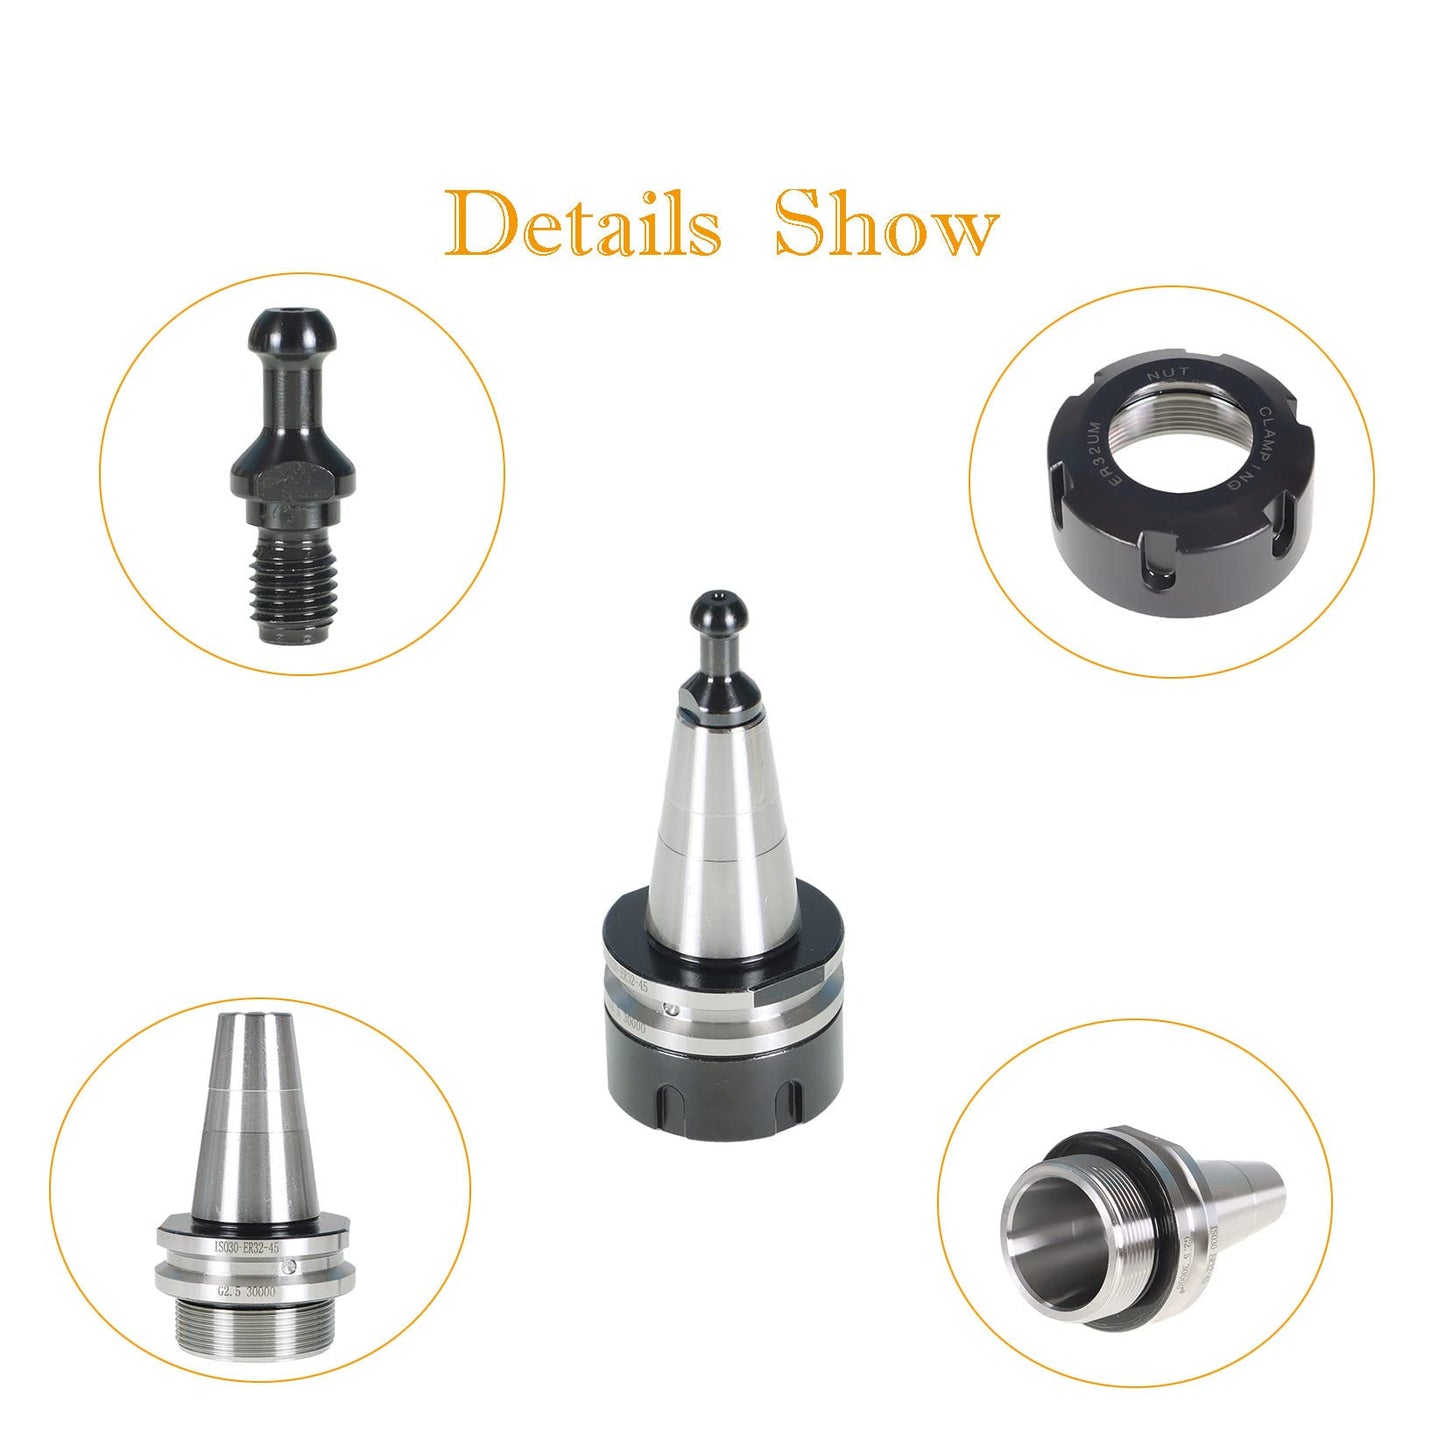 findmall ISO30 ER32-45L Chuck Tool Holder Balance Collet Chuck G2.5 30000RPM CNC Stainless Steel Tool Holder with Pull Stud Milling Lathe Fit for CNC